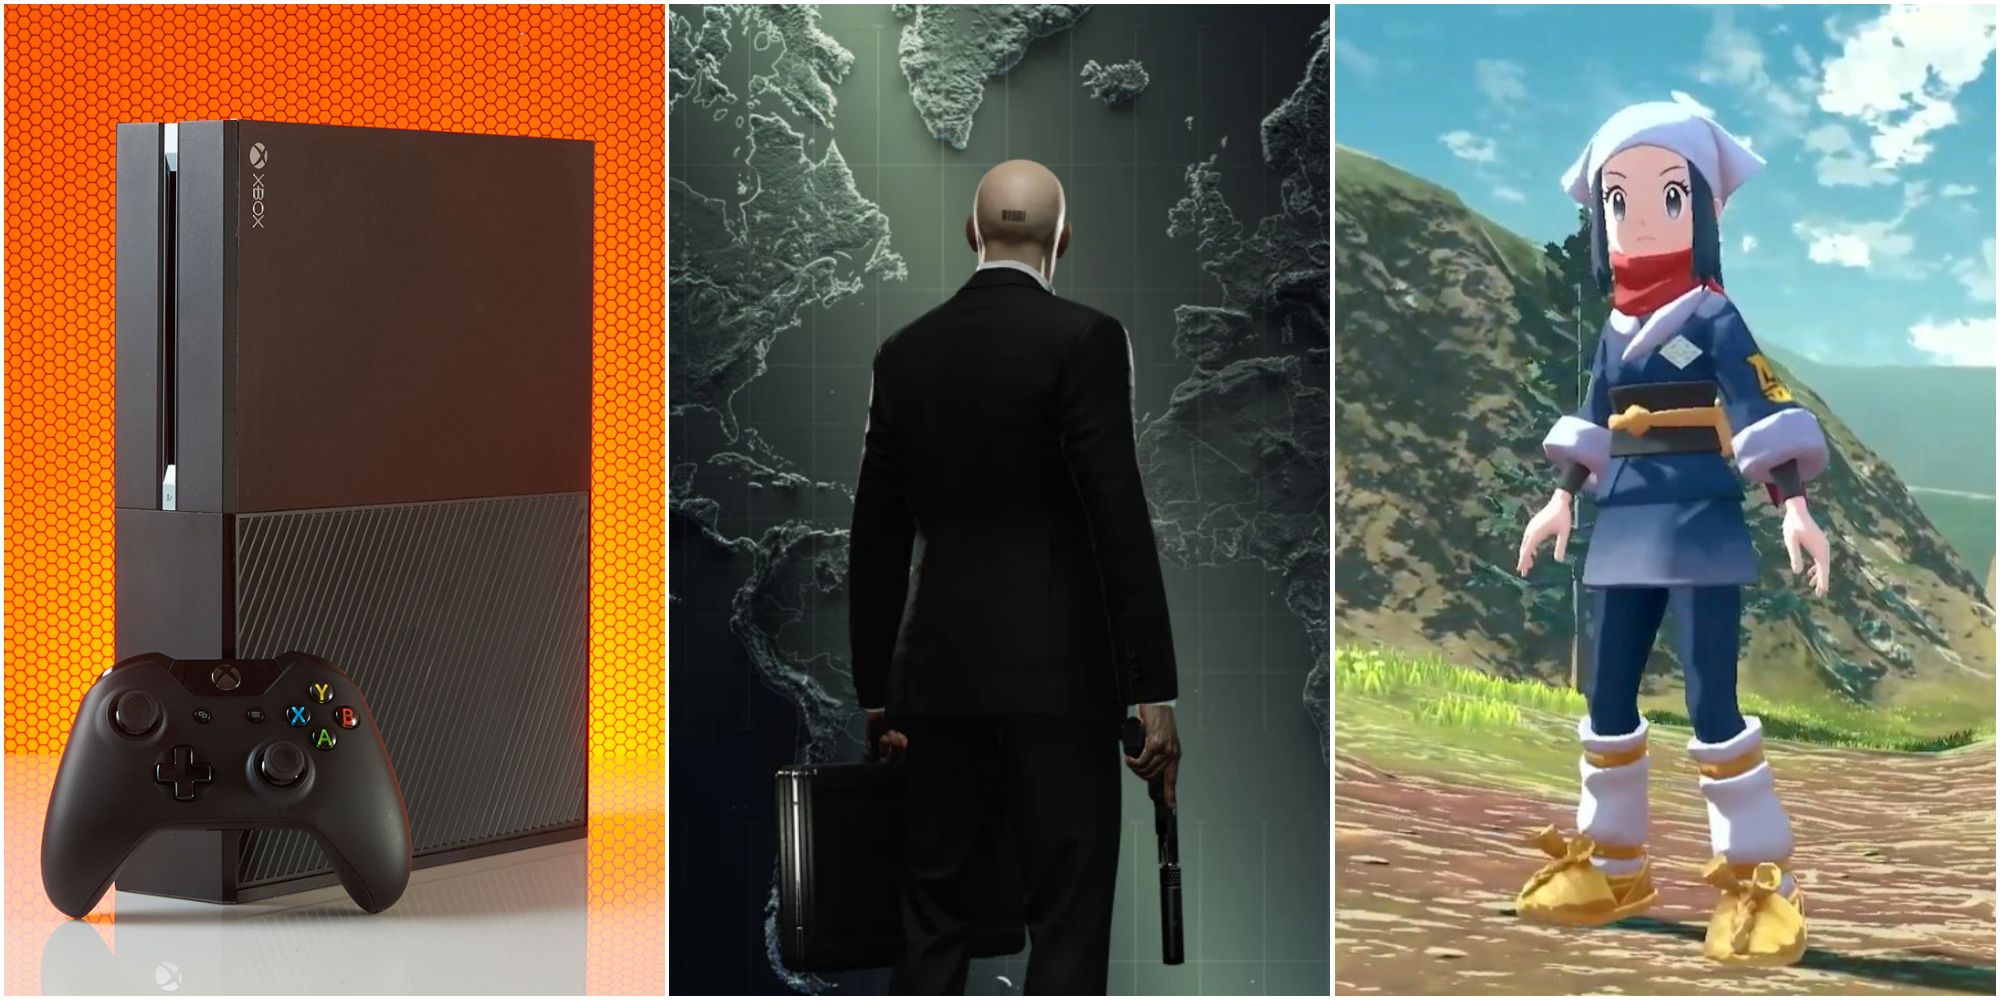 An Xbox One, Agent 47 from Hitman 3, and the main character of Pokemon Legends: Arceus